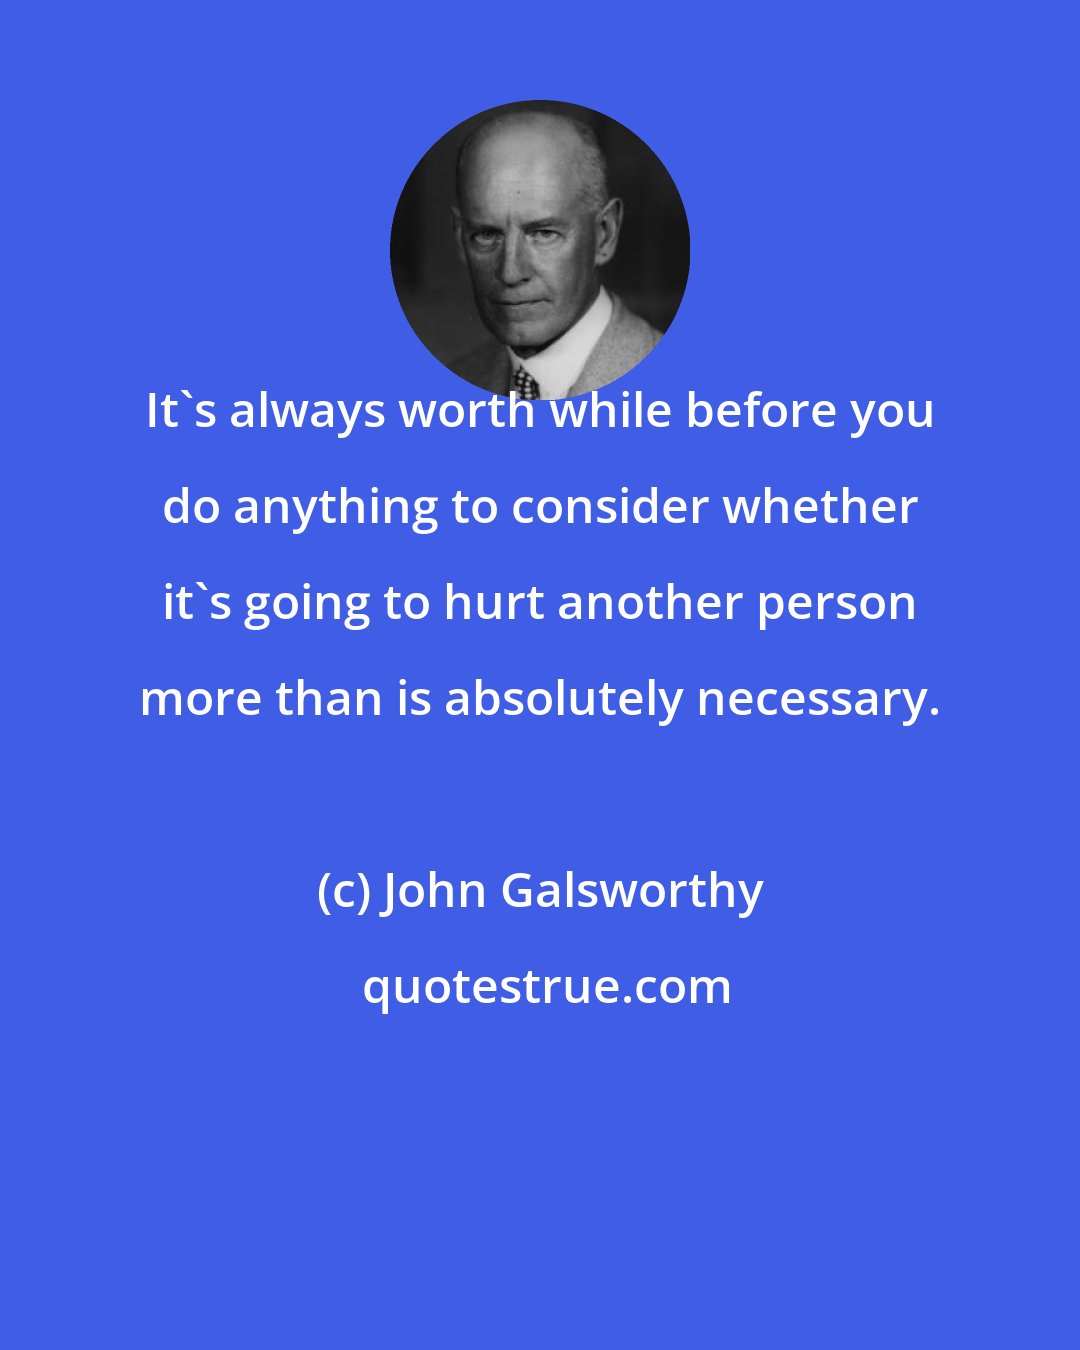 John Galsworthy: It`s always worth while before you do anything to consider whether it`s going to hurt another person more than is absolutely necessary.